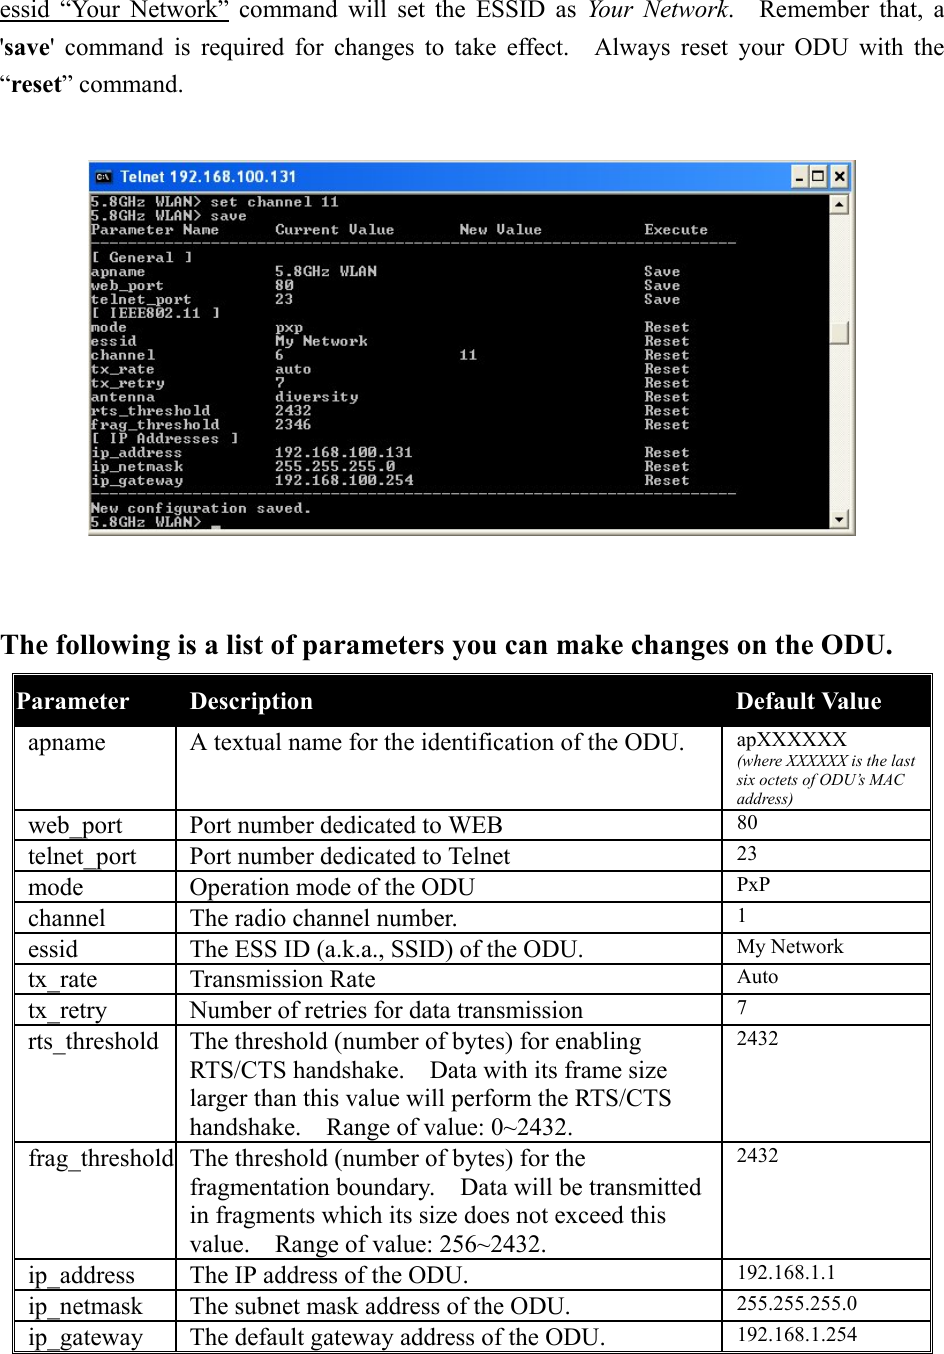 essid “Your Network” command will set the ESSID as Your Network.  Remember that, a &apos;save&apos; command is required for changes to take effect.  Always reset your ODU with the “reset” command.    The following is a list of parameters you can make changes on the ODU. Parameter   Description Default Value apname  A textual name for the identification of the ODU.  apXXXXXX (where XXXXXX is the last six octets of ODU’s MAC address) web_port  Port number dedicated to WEB  80 telnet_port  Port number dedicated to Telnet  23 mode  Operation mode of the ODU  PxP channel  The radio channel number.  1 essid  The ESS ID (a.k.a., SSID) of the ODU.  My Network tx_rate Transmission Rate  Auto tx_retry  Number of retries for data transmission  7 rts_threshold  The threshold (number of bytes) for enabling RTS/CTS handshake.    Data with its frame size larger than this value will perform the RTS/CTS handshake.    Range of value: 0~2432. 2432 frag_threshold  The threshold (number of bytes) for the fragmentation boundary.    Data will be transmitted in fragments which its size does not exceed this value.    Range of value: 256~2432. 2432 ip_address  The IP address of the ODU.  192.168.1.1 ip_netmask  The subnet mask address of the ODU.  255.255.255.0 ip_gateway  The default gateway address of the ODU.  192.168.1.254 